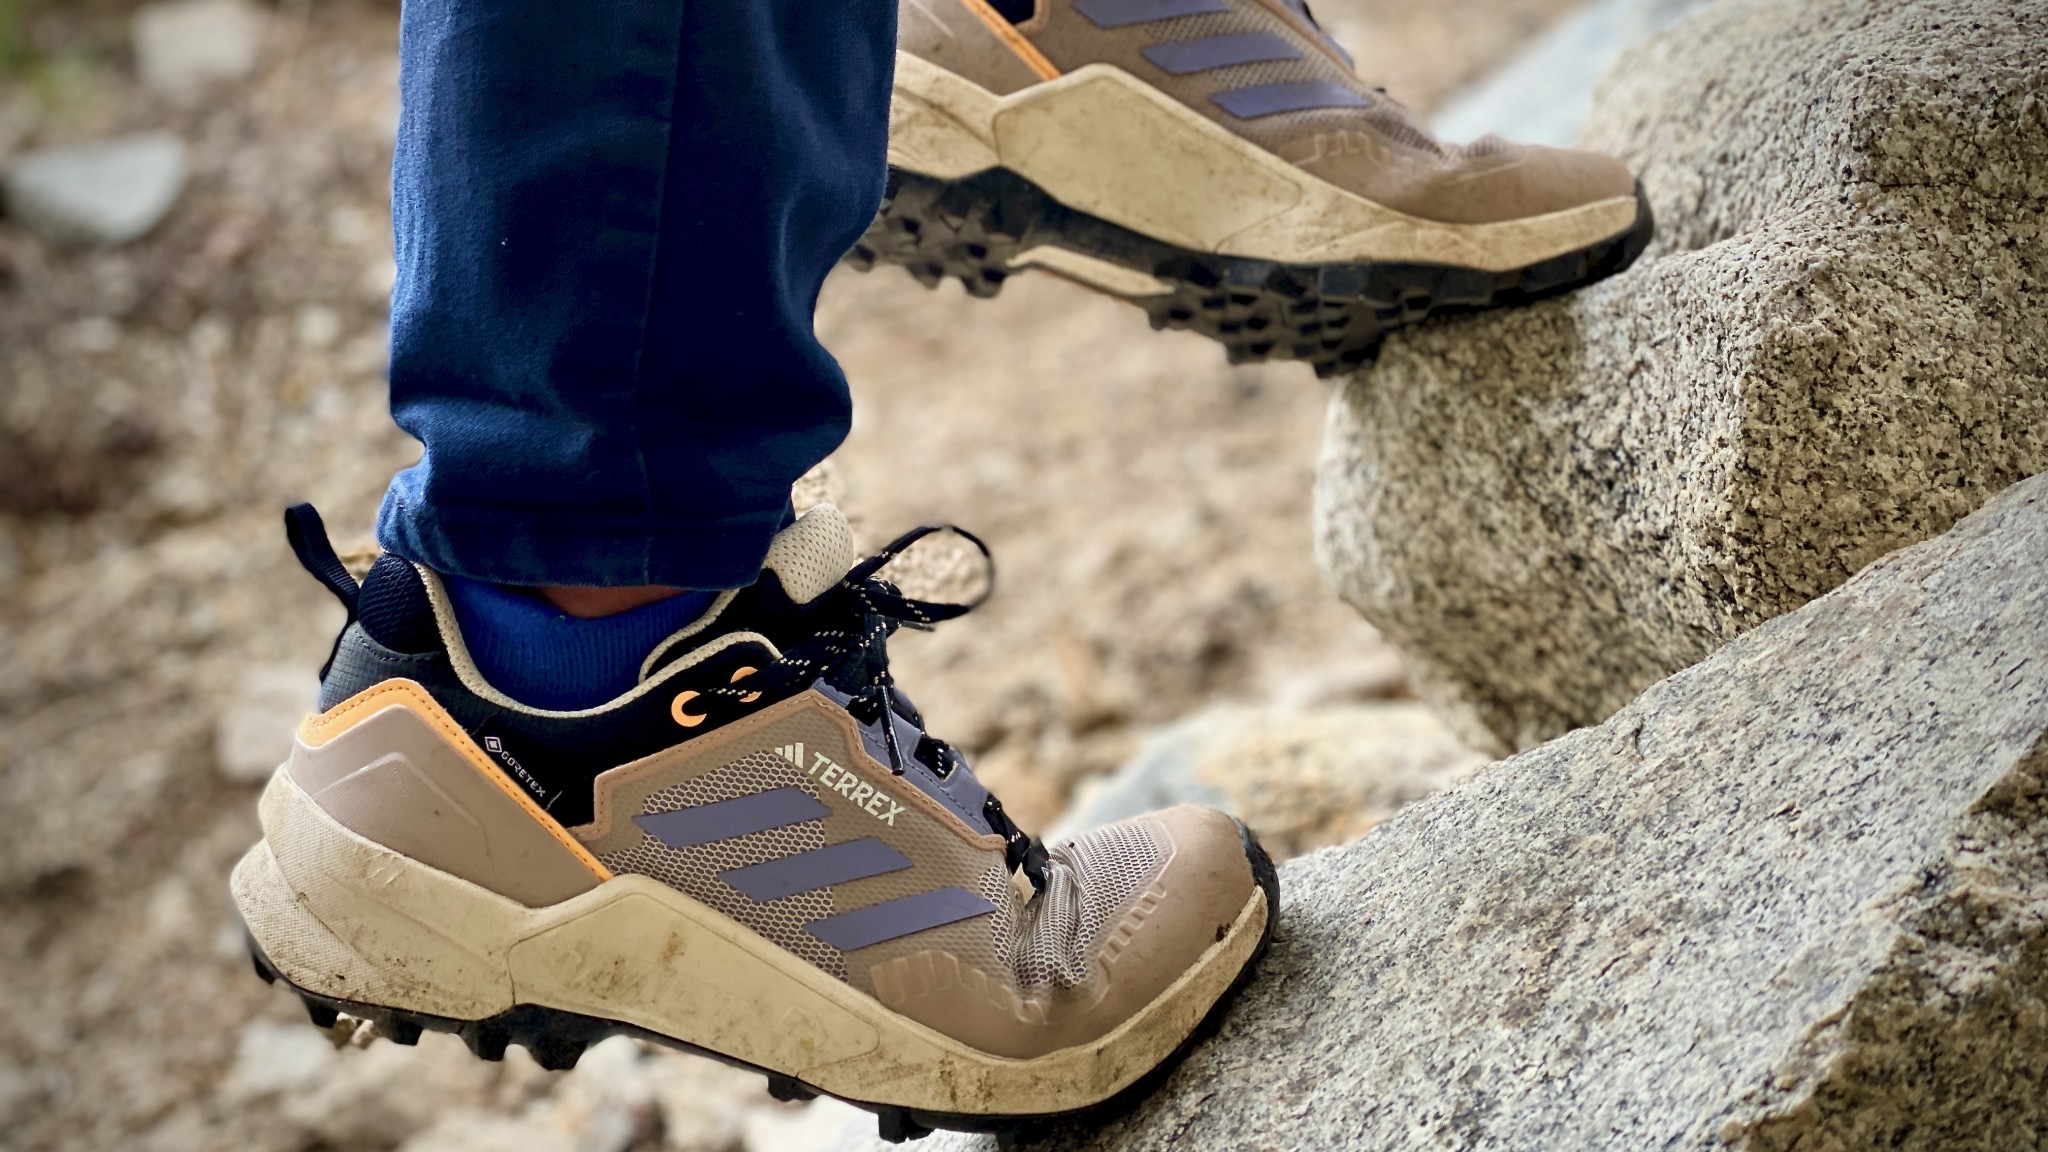 Adidas Terrex Swift R3 Gore-Tex - Women's Review | Tested by GearLab